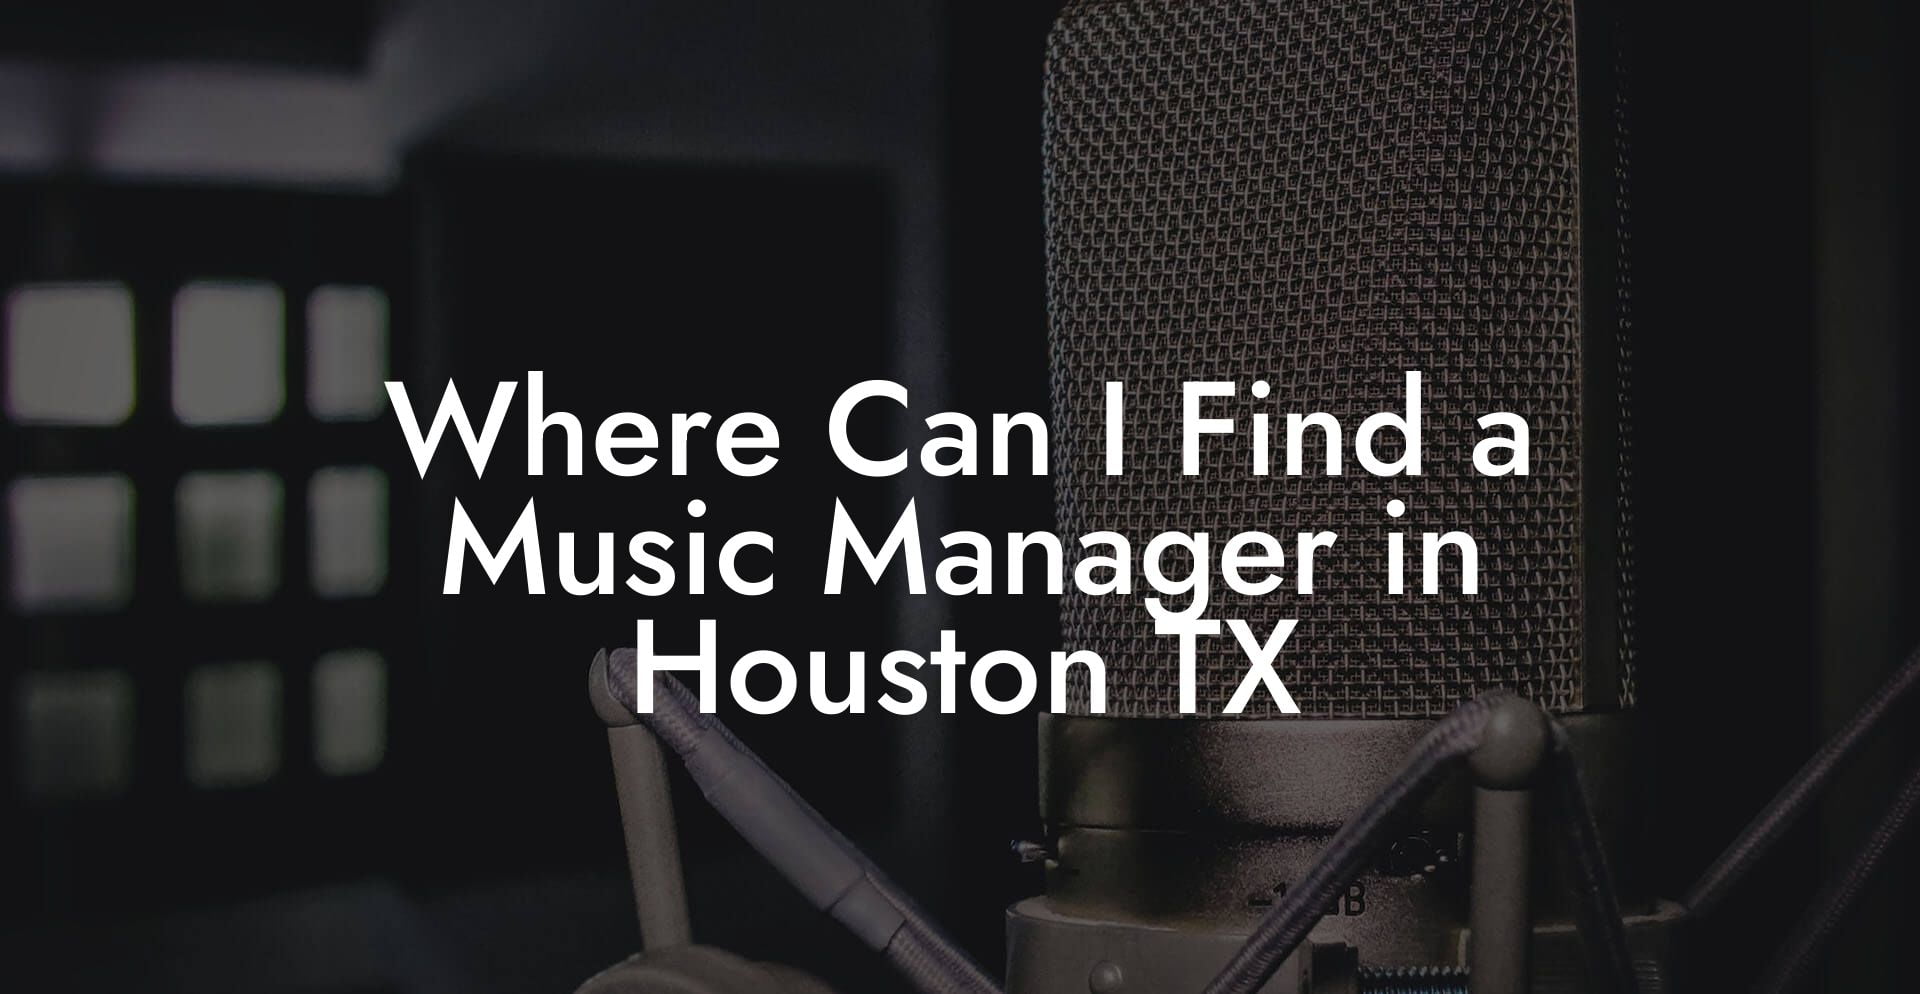 Where Can I Find a Music Manager in Houston TX